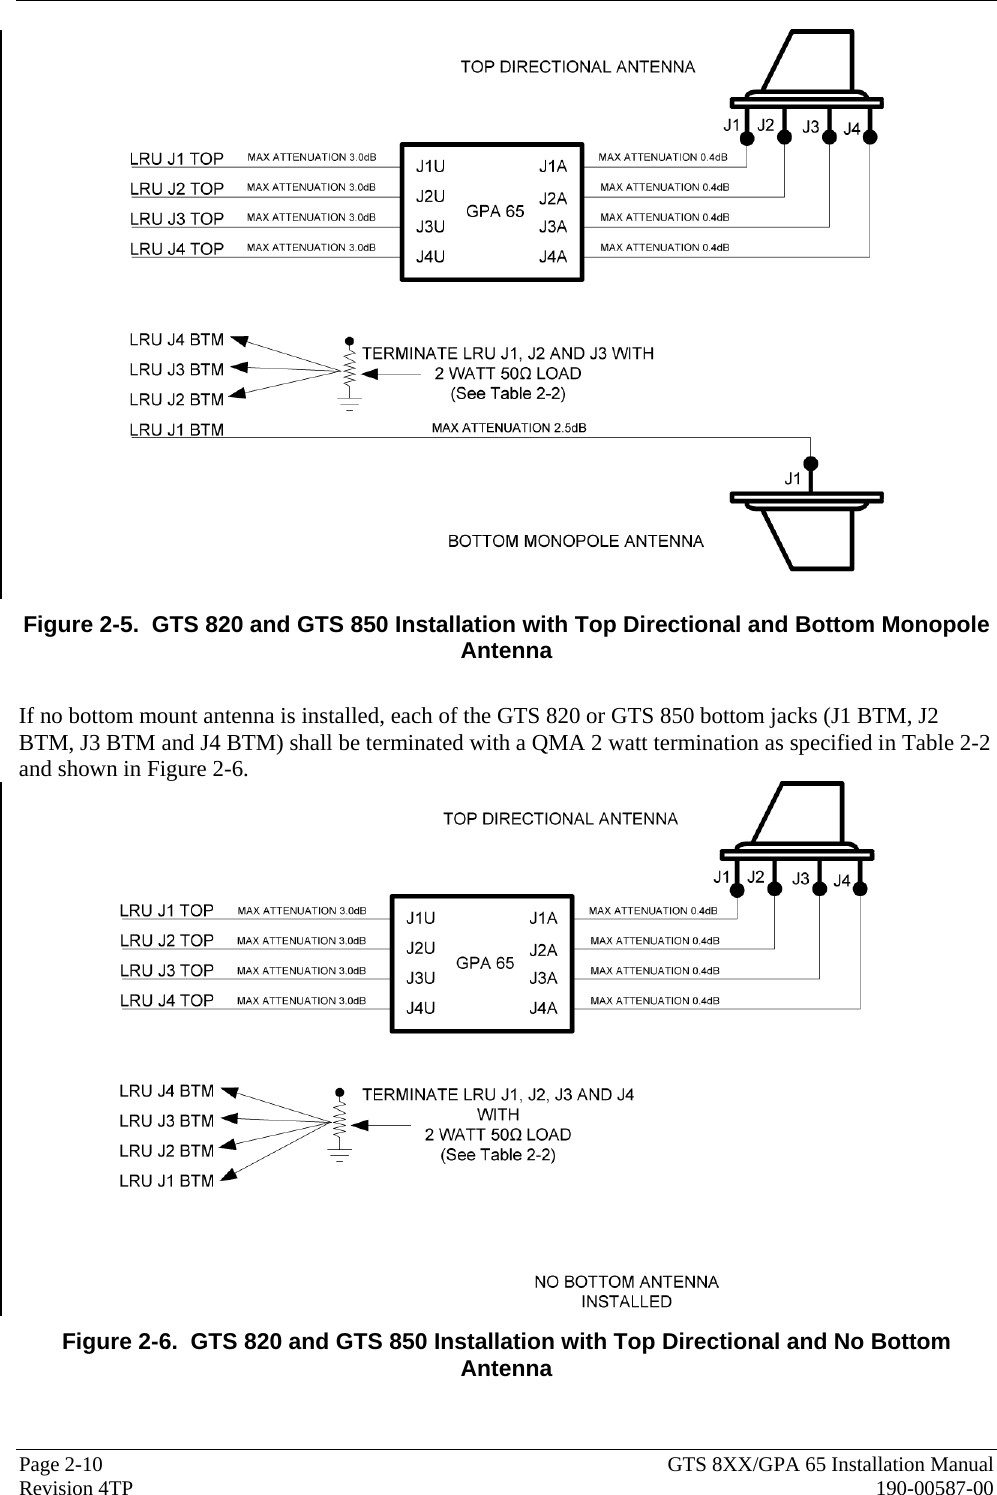  Page 2-10  GTS 8XX/GPA 65 Installation Manual Revision 4TP  190-00587-00  Figure 2-5.  GTS 820 and GTS 850 Installation with Top Directional and Bottom Monopole Antenna  If no bottom mount antenna is installed, each of the GTS 820 or GTS 850 bottom jacks (J1 BTM, J2 BTM, J3 BTM and J4 BTM) shall be terminated with a QMA 2 watt termination as specified in Table 2-2 and shown in Figure 2-6.  Figure 2-6.  GTS 820 and GTS 850 Installation with Top Directional and No Bottom Antenna 